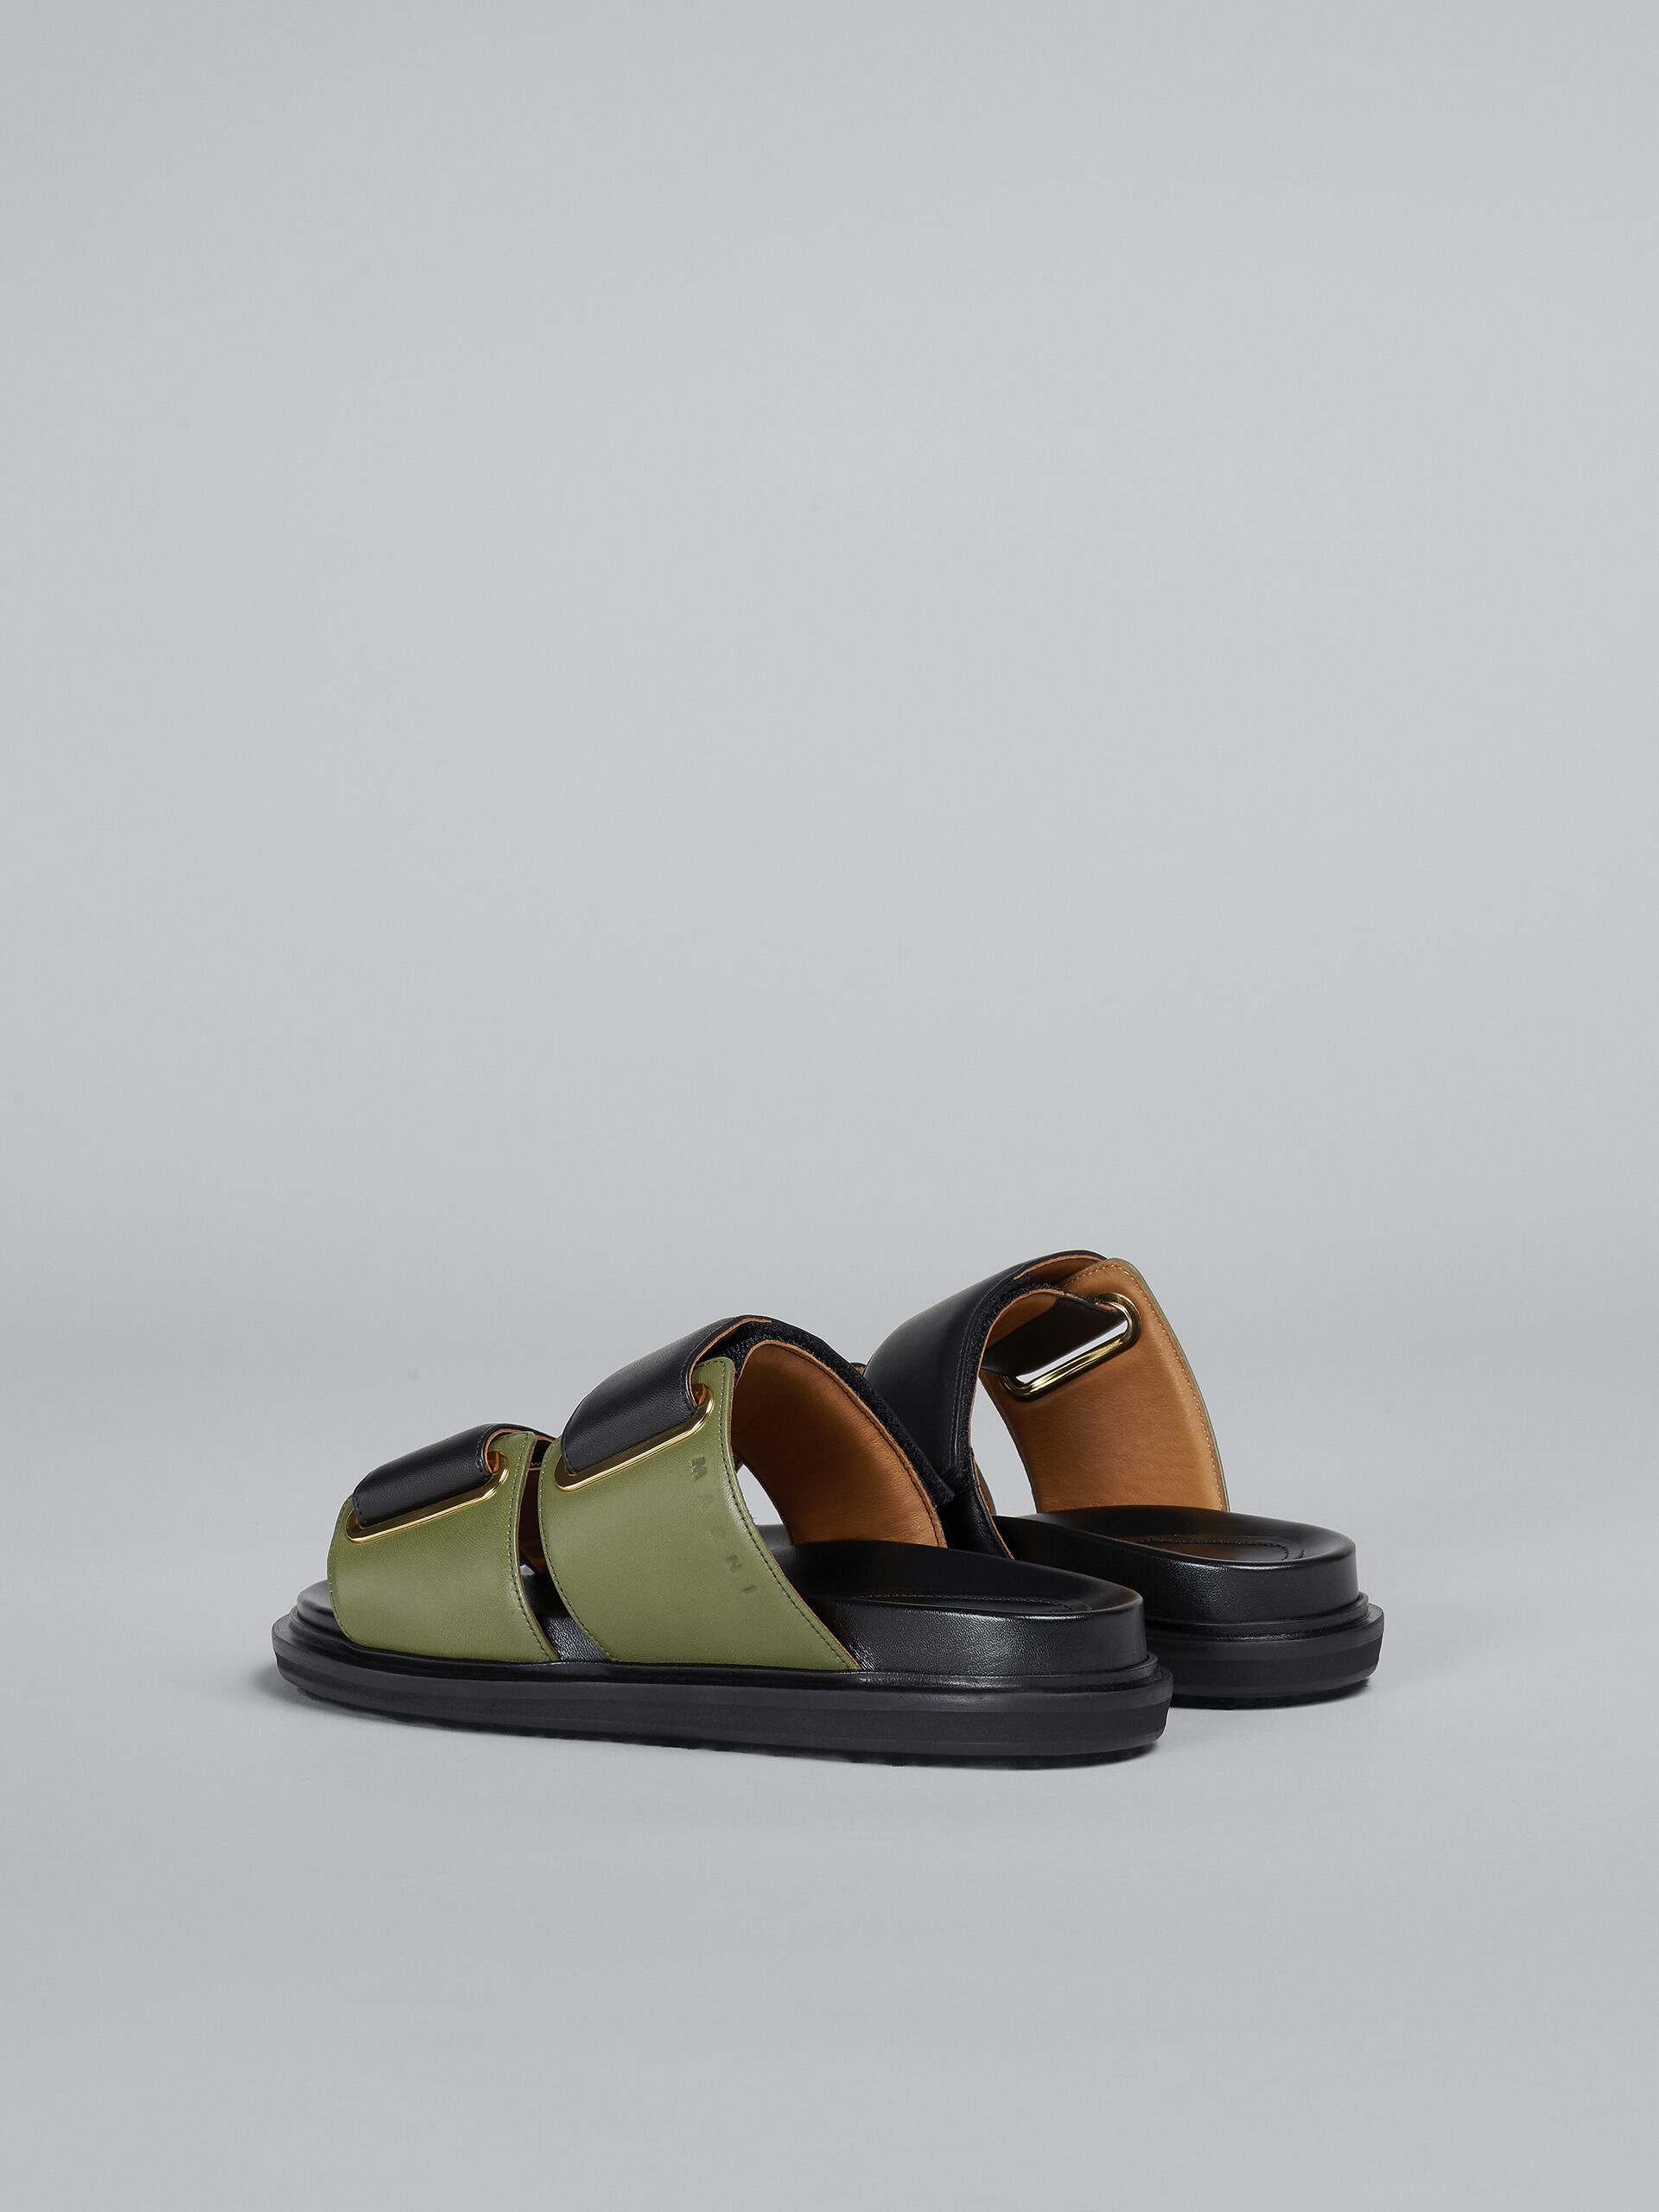 Black and green leather fussbett - Sandals - Image 3